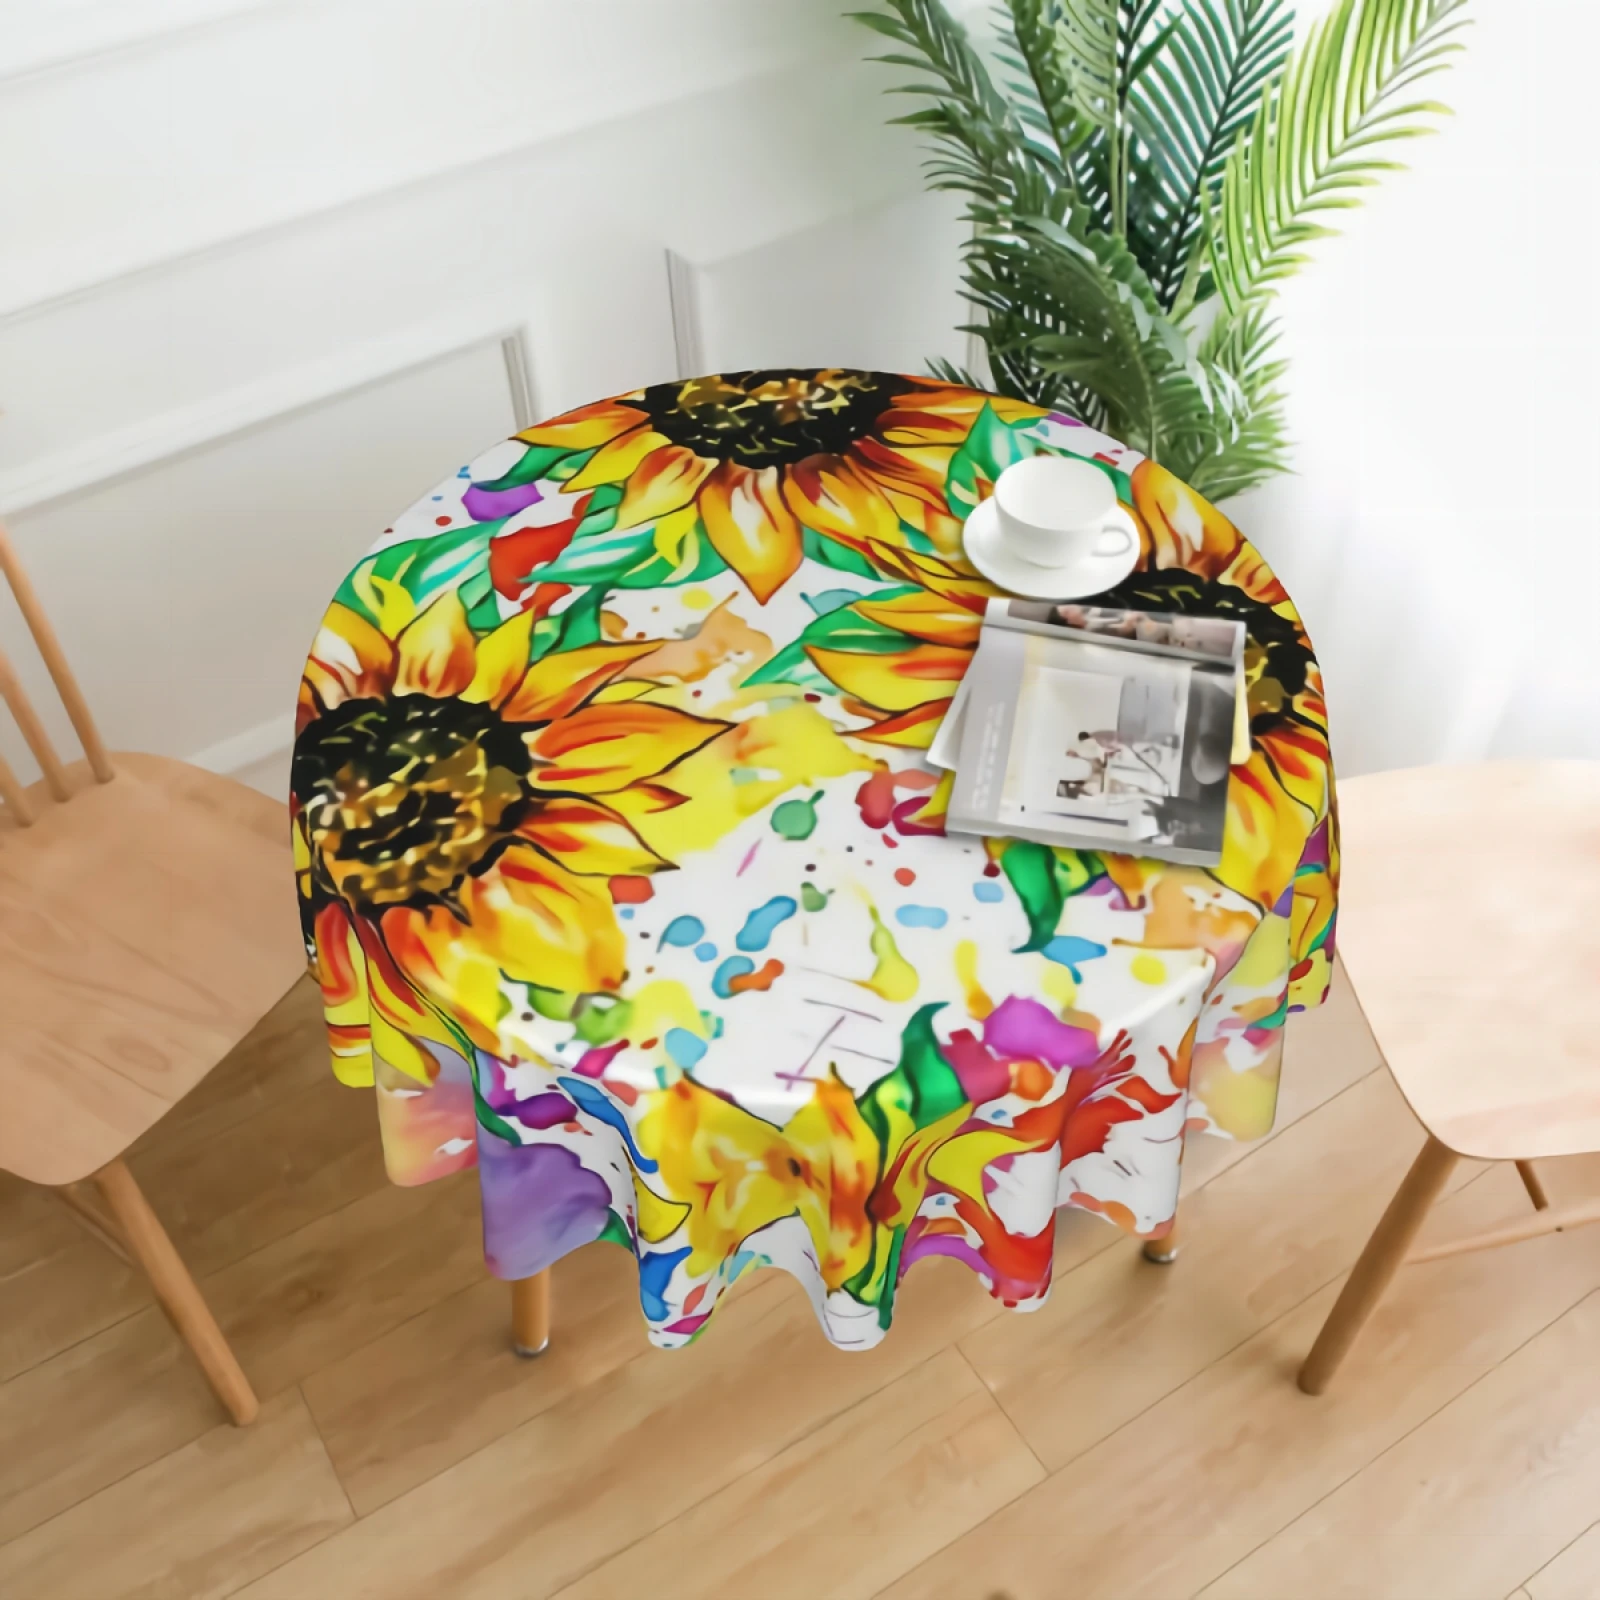 

Watercolor Sunflower Table Cloth Polyester Round Table Cover for Kitchen Dinning Waterproof Wrinkle Free Table Cloths